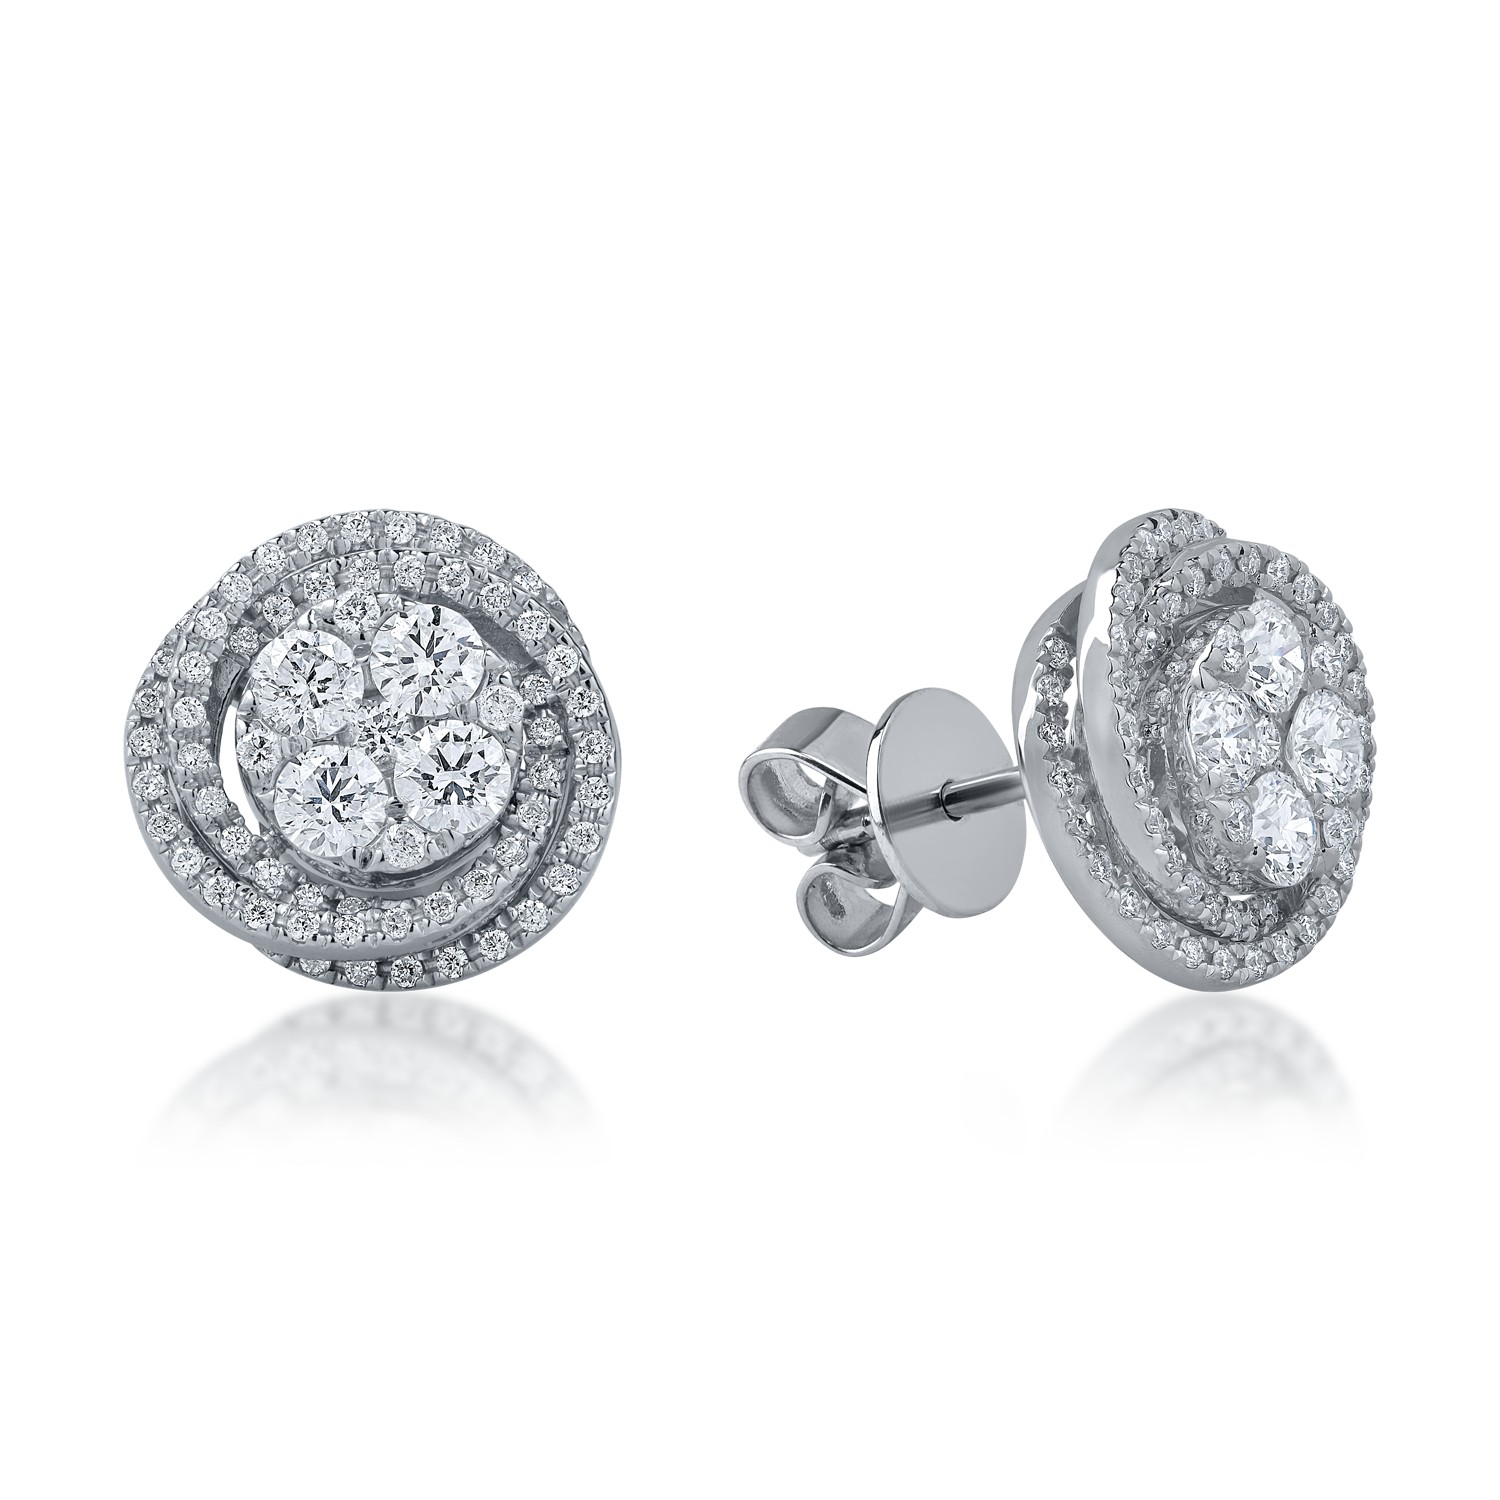 White gold round earrings with 1.16ct diamonds